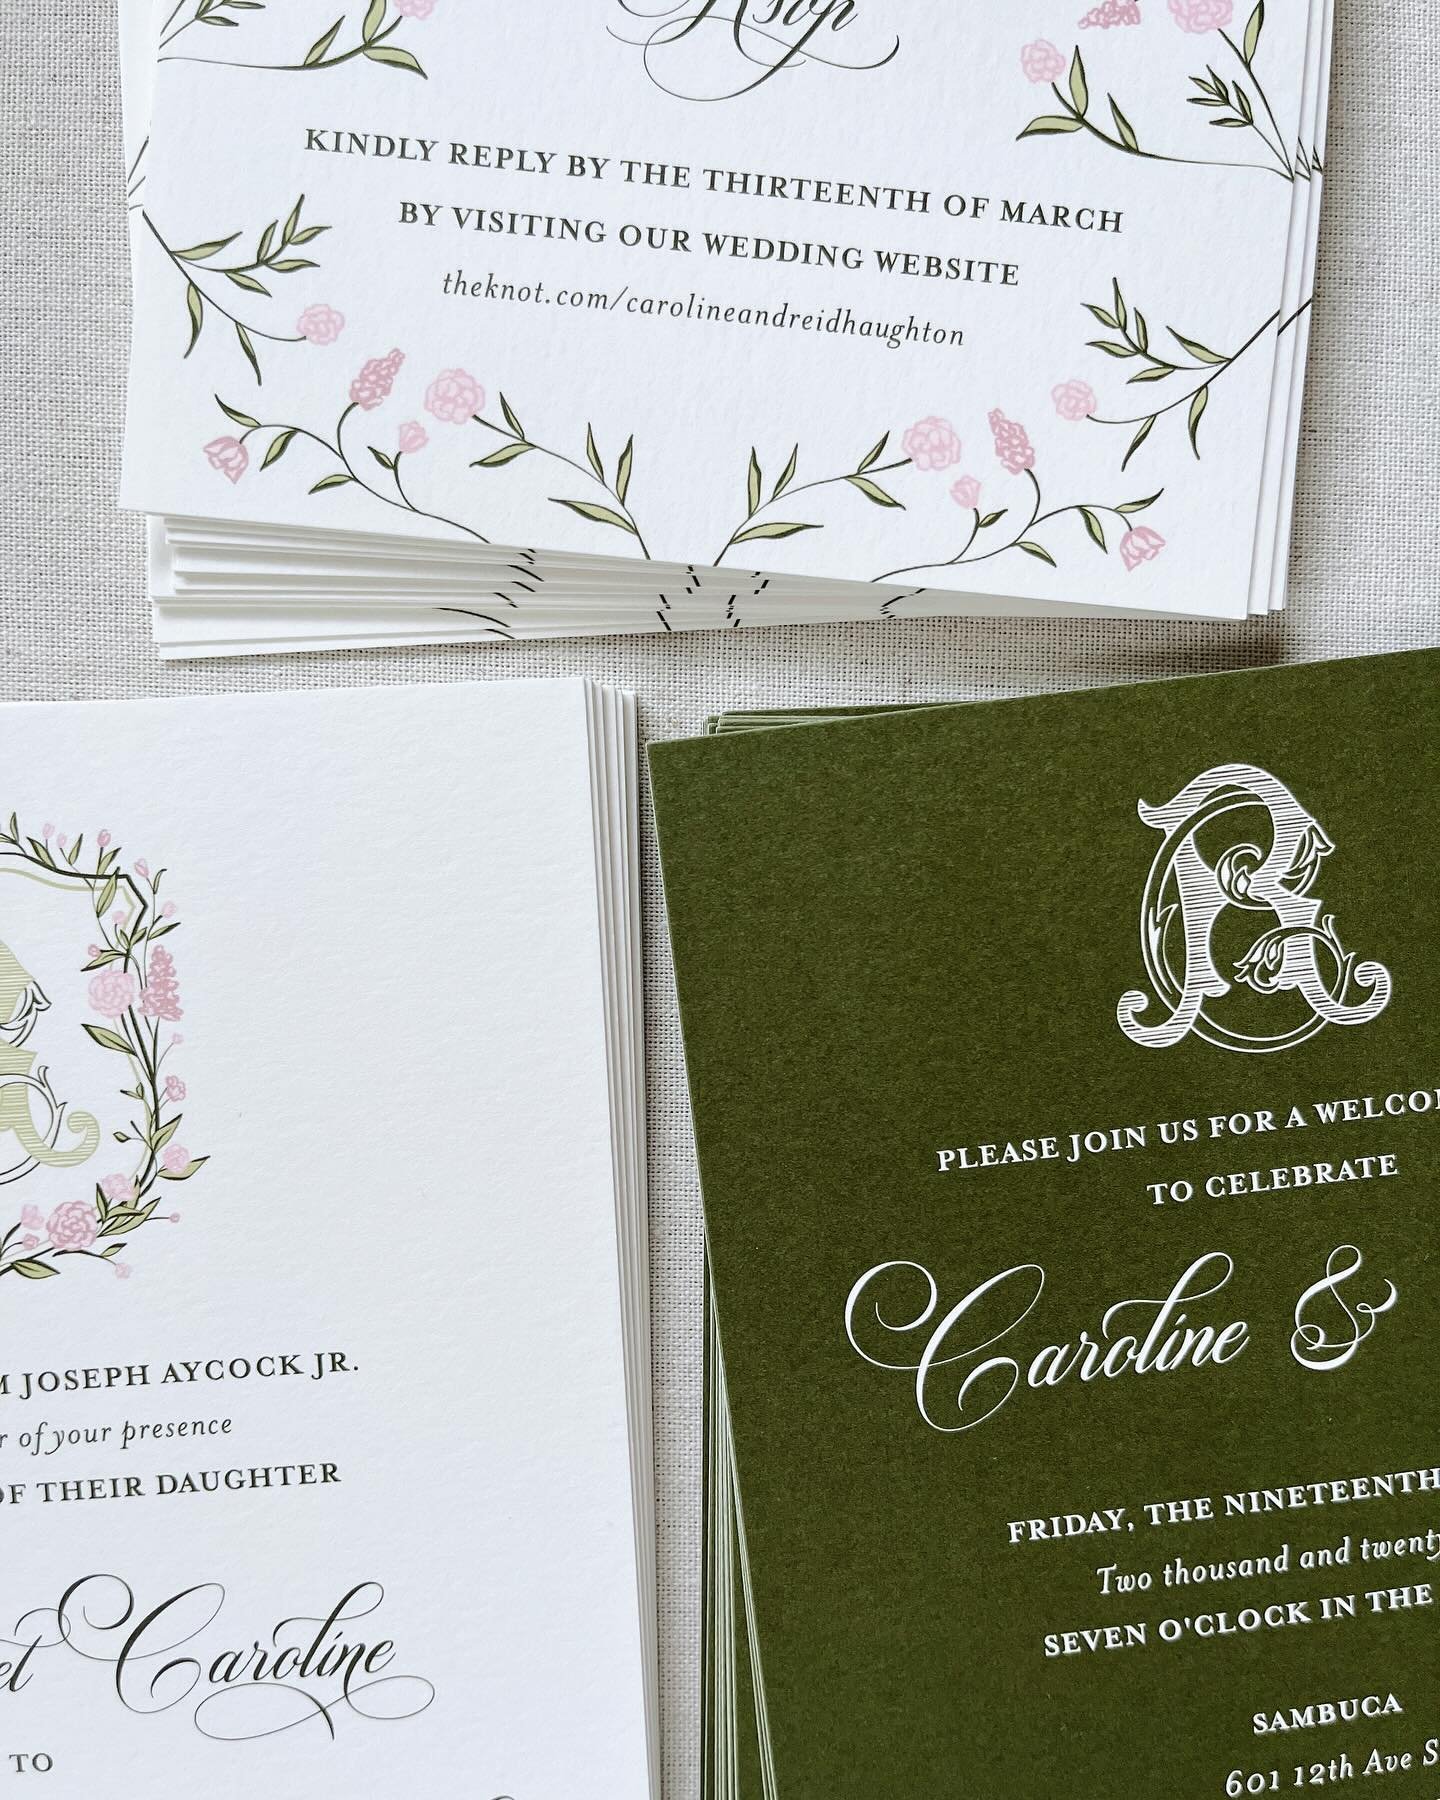 This past Saturday Caroline and Reid got married! We are always honored to create wedding stationery for our Brides and this was no exception. 🤍🤍🤍

#weddingstationery #weddinginvitations #stationery #trending #weddinginspiration